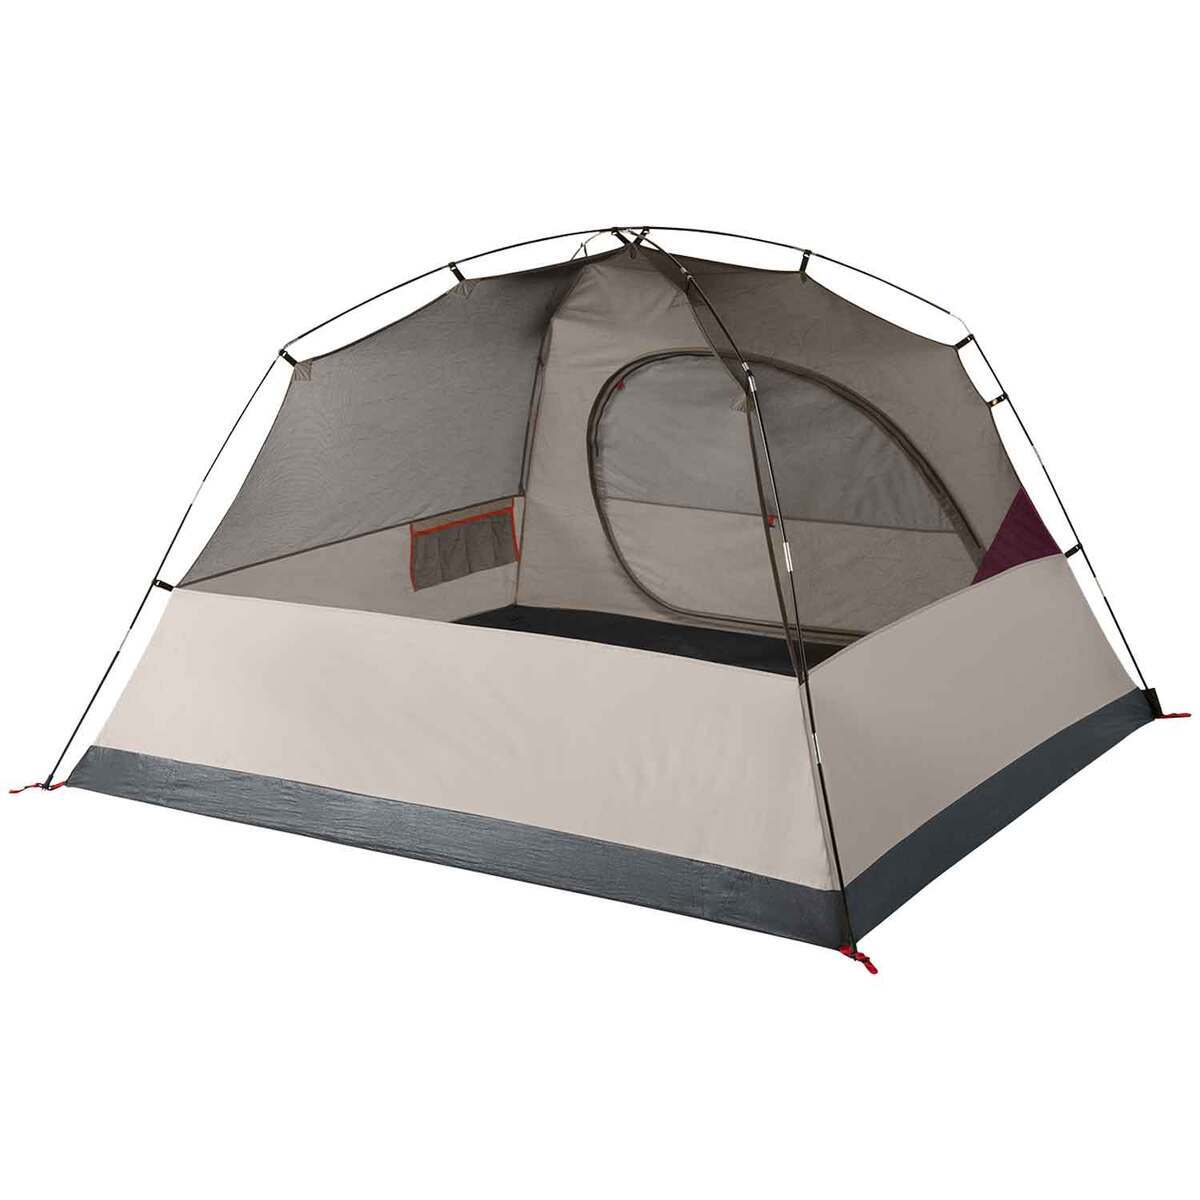 Coleman Skydome 4-Person Camping Tent - Blackberry | Sportsman's Warehouse